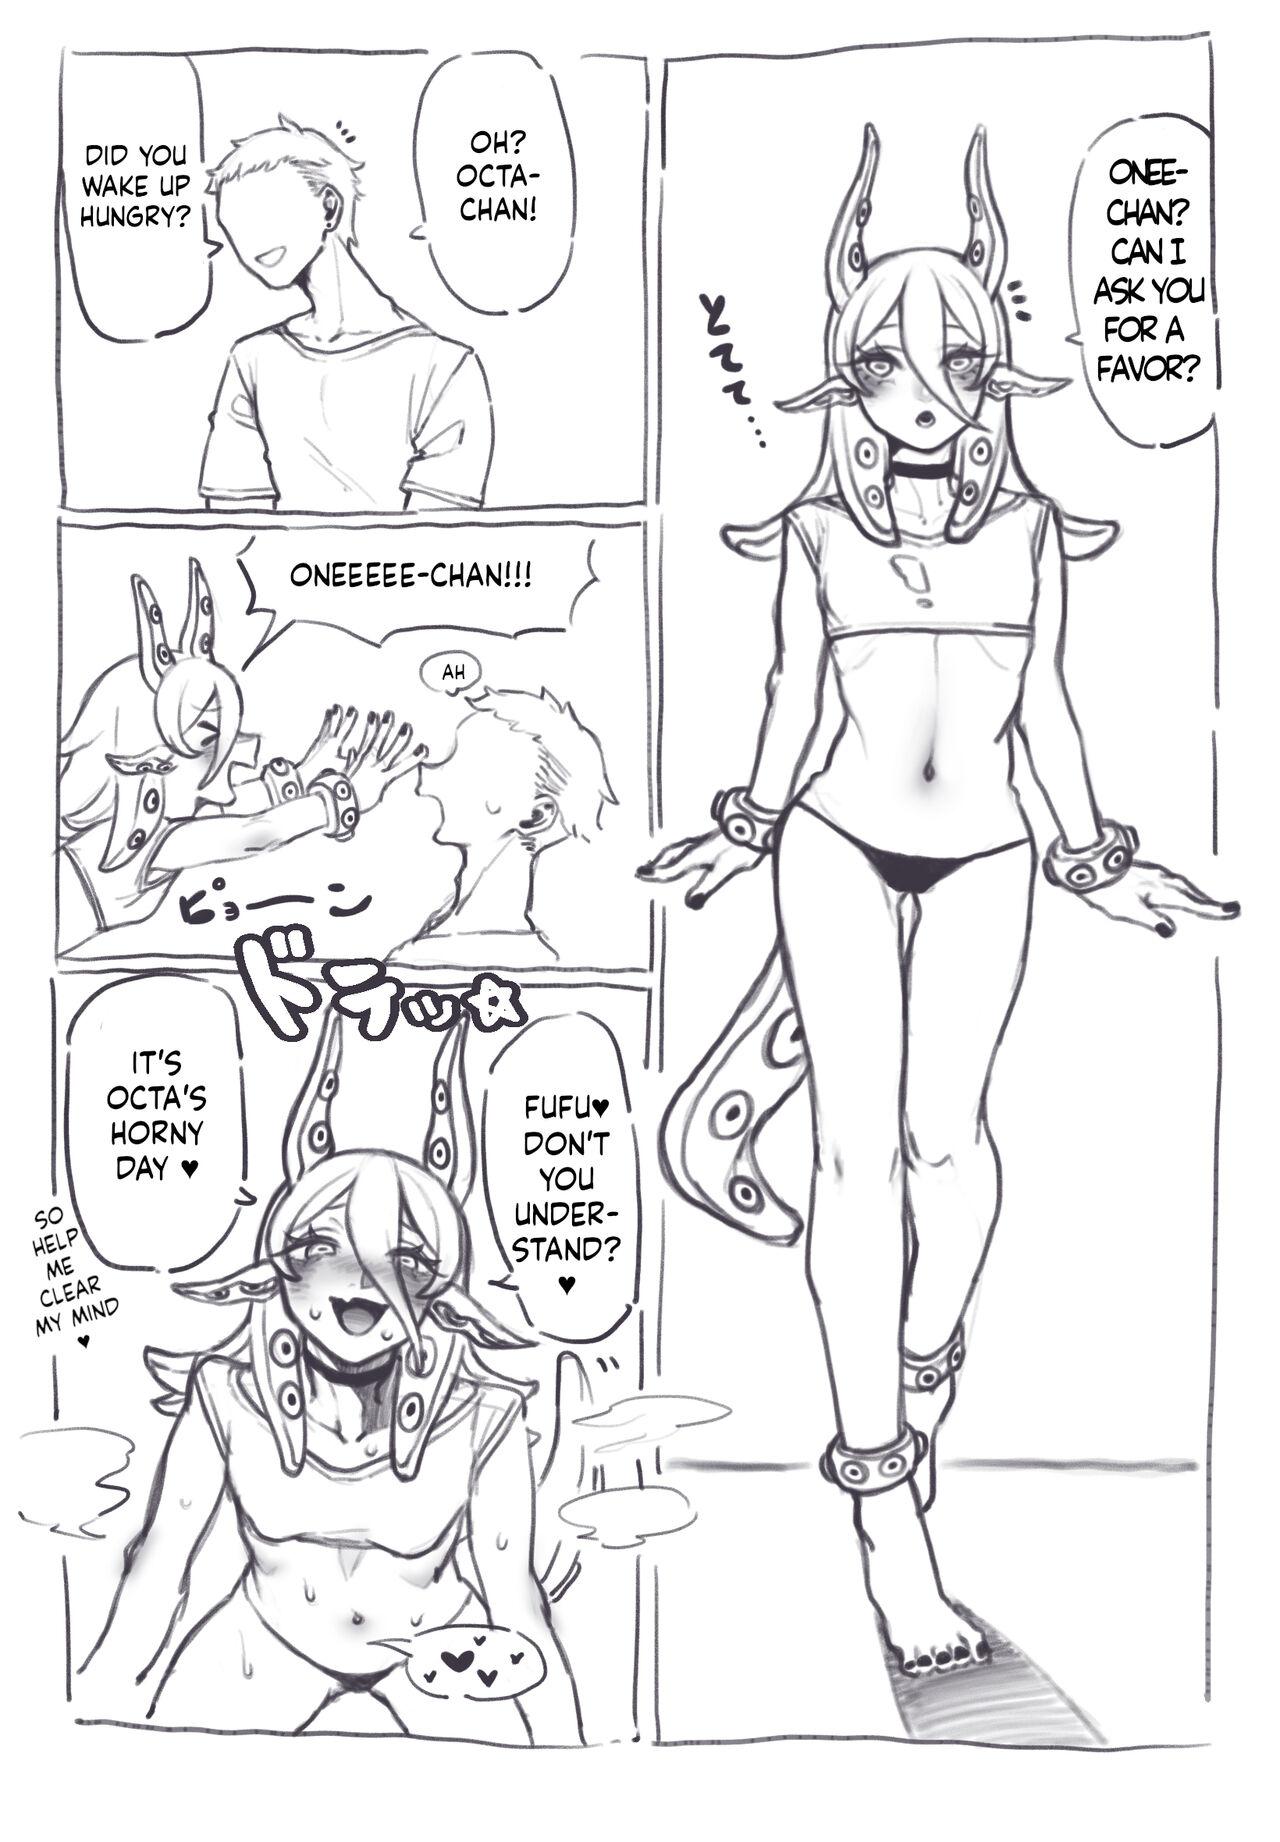 Onlyfans オクタちゃんとえつ するだけの漫画 Sexy - Picture 2